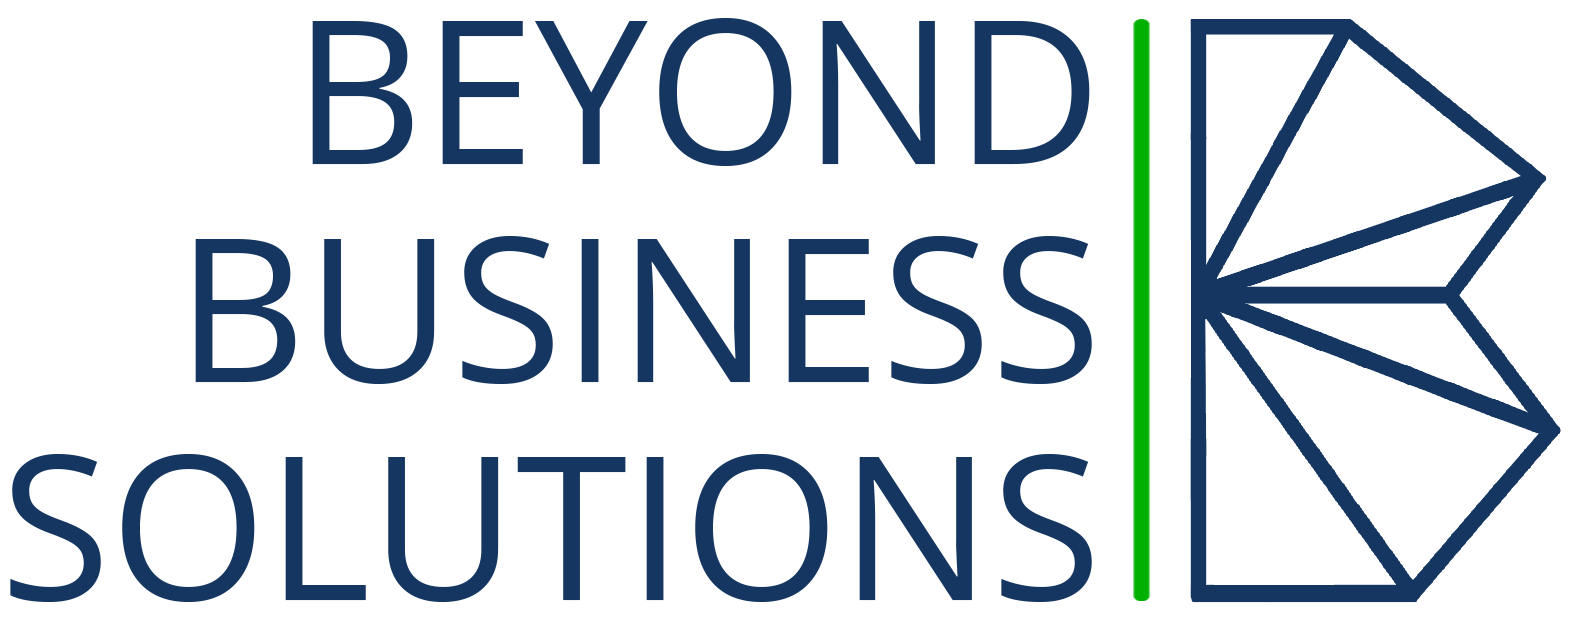 Beyond Business Solutions